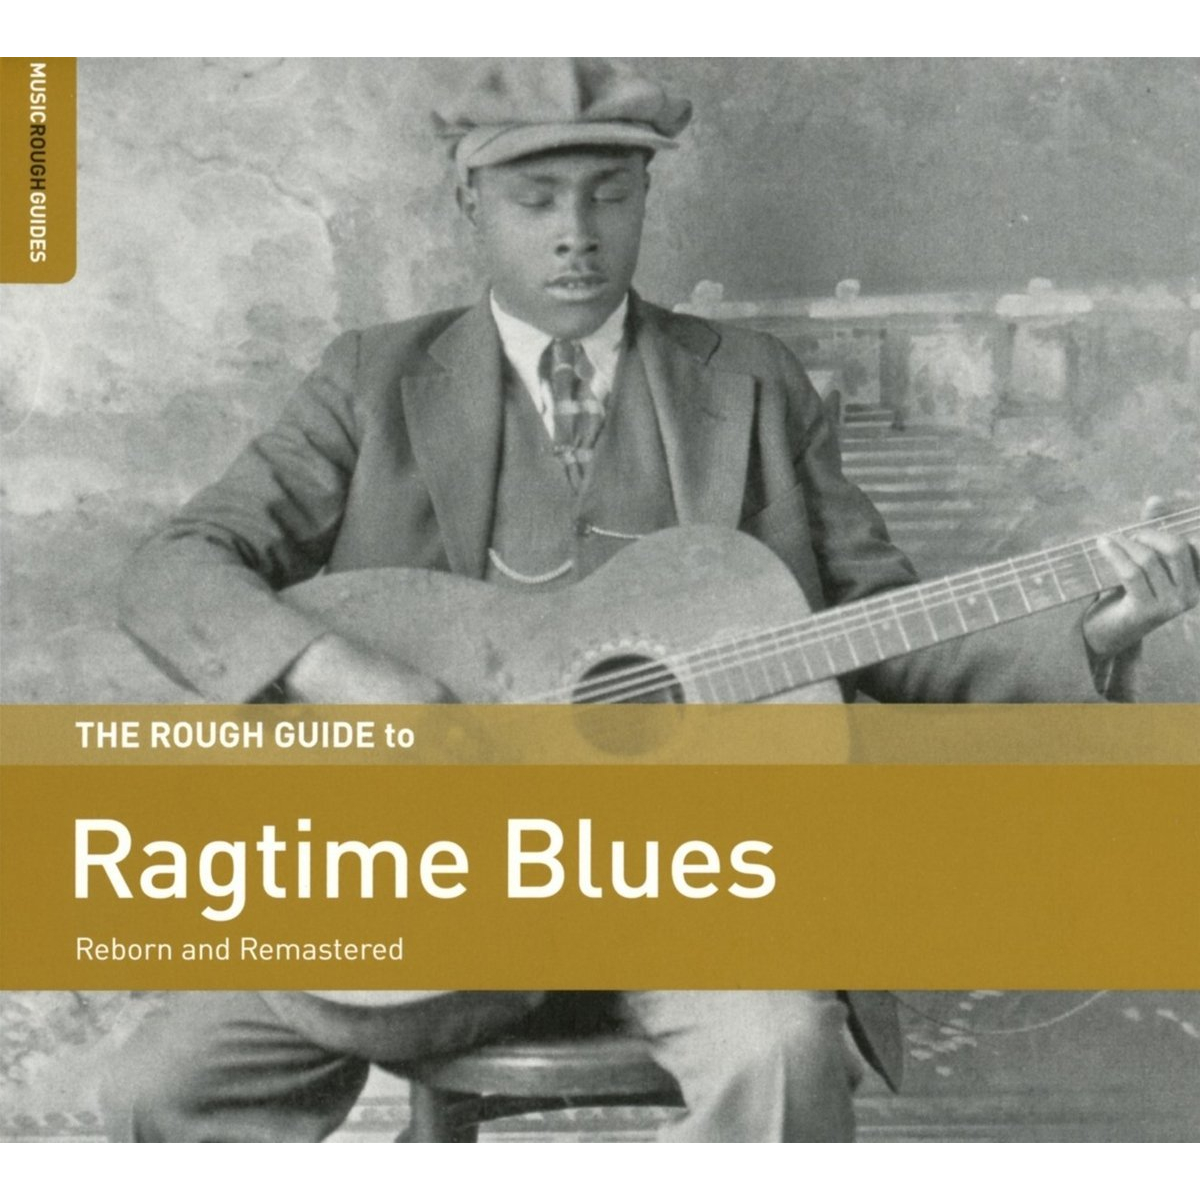 THE ROUGH GUIDE TO RAGTIME BLUES